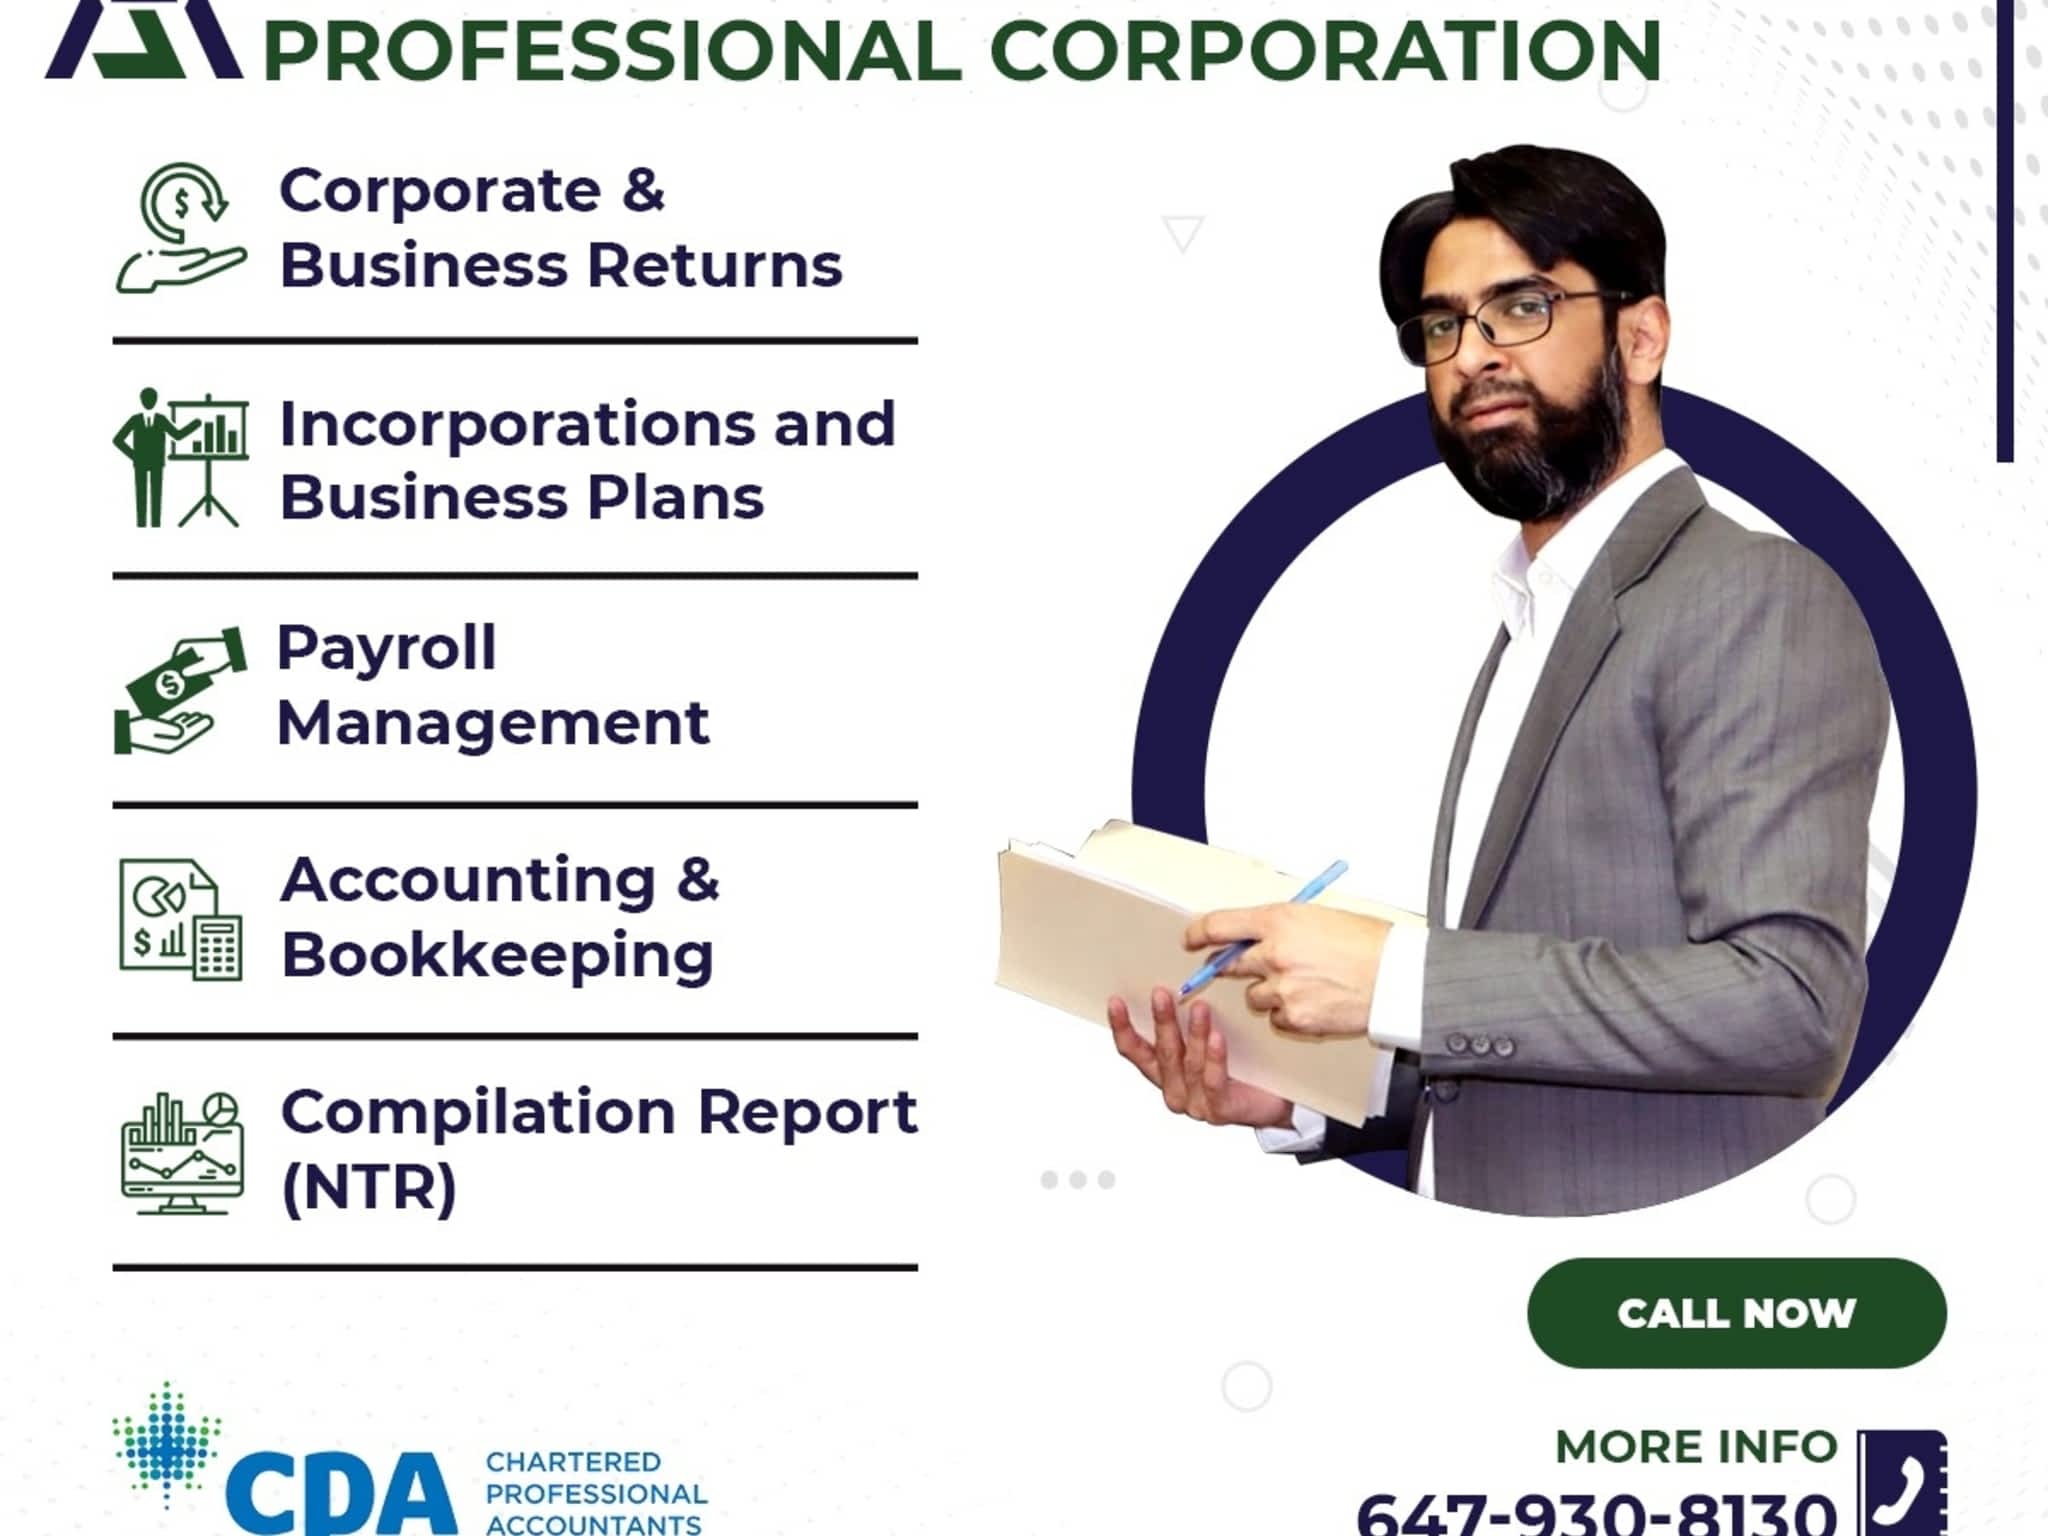 photo Source Accounting Professional Corporation, Cpa